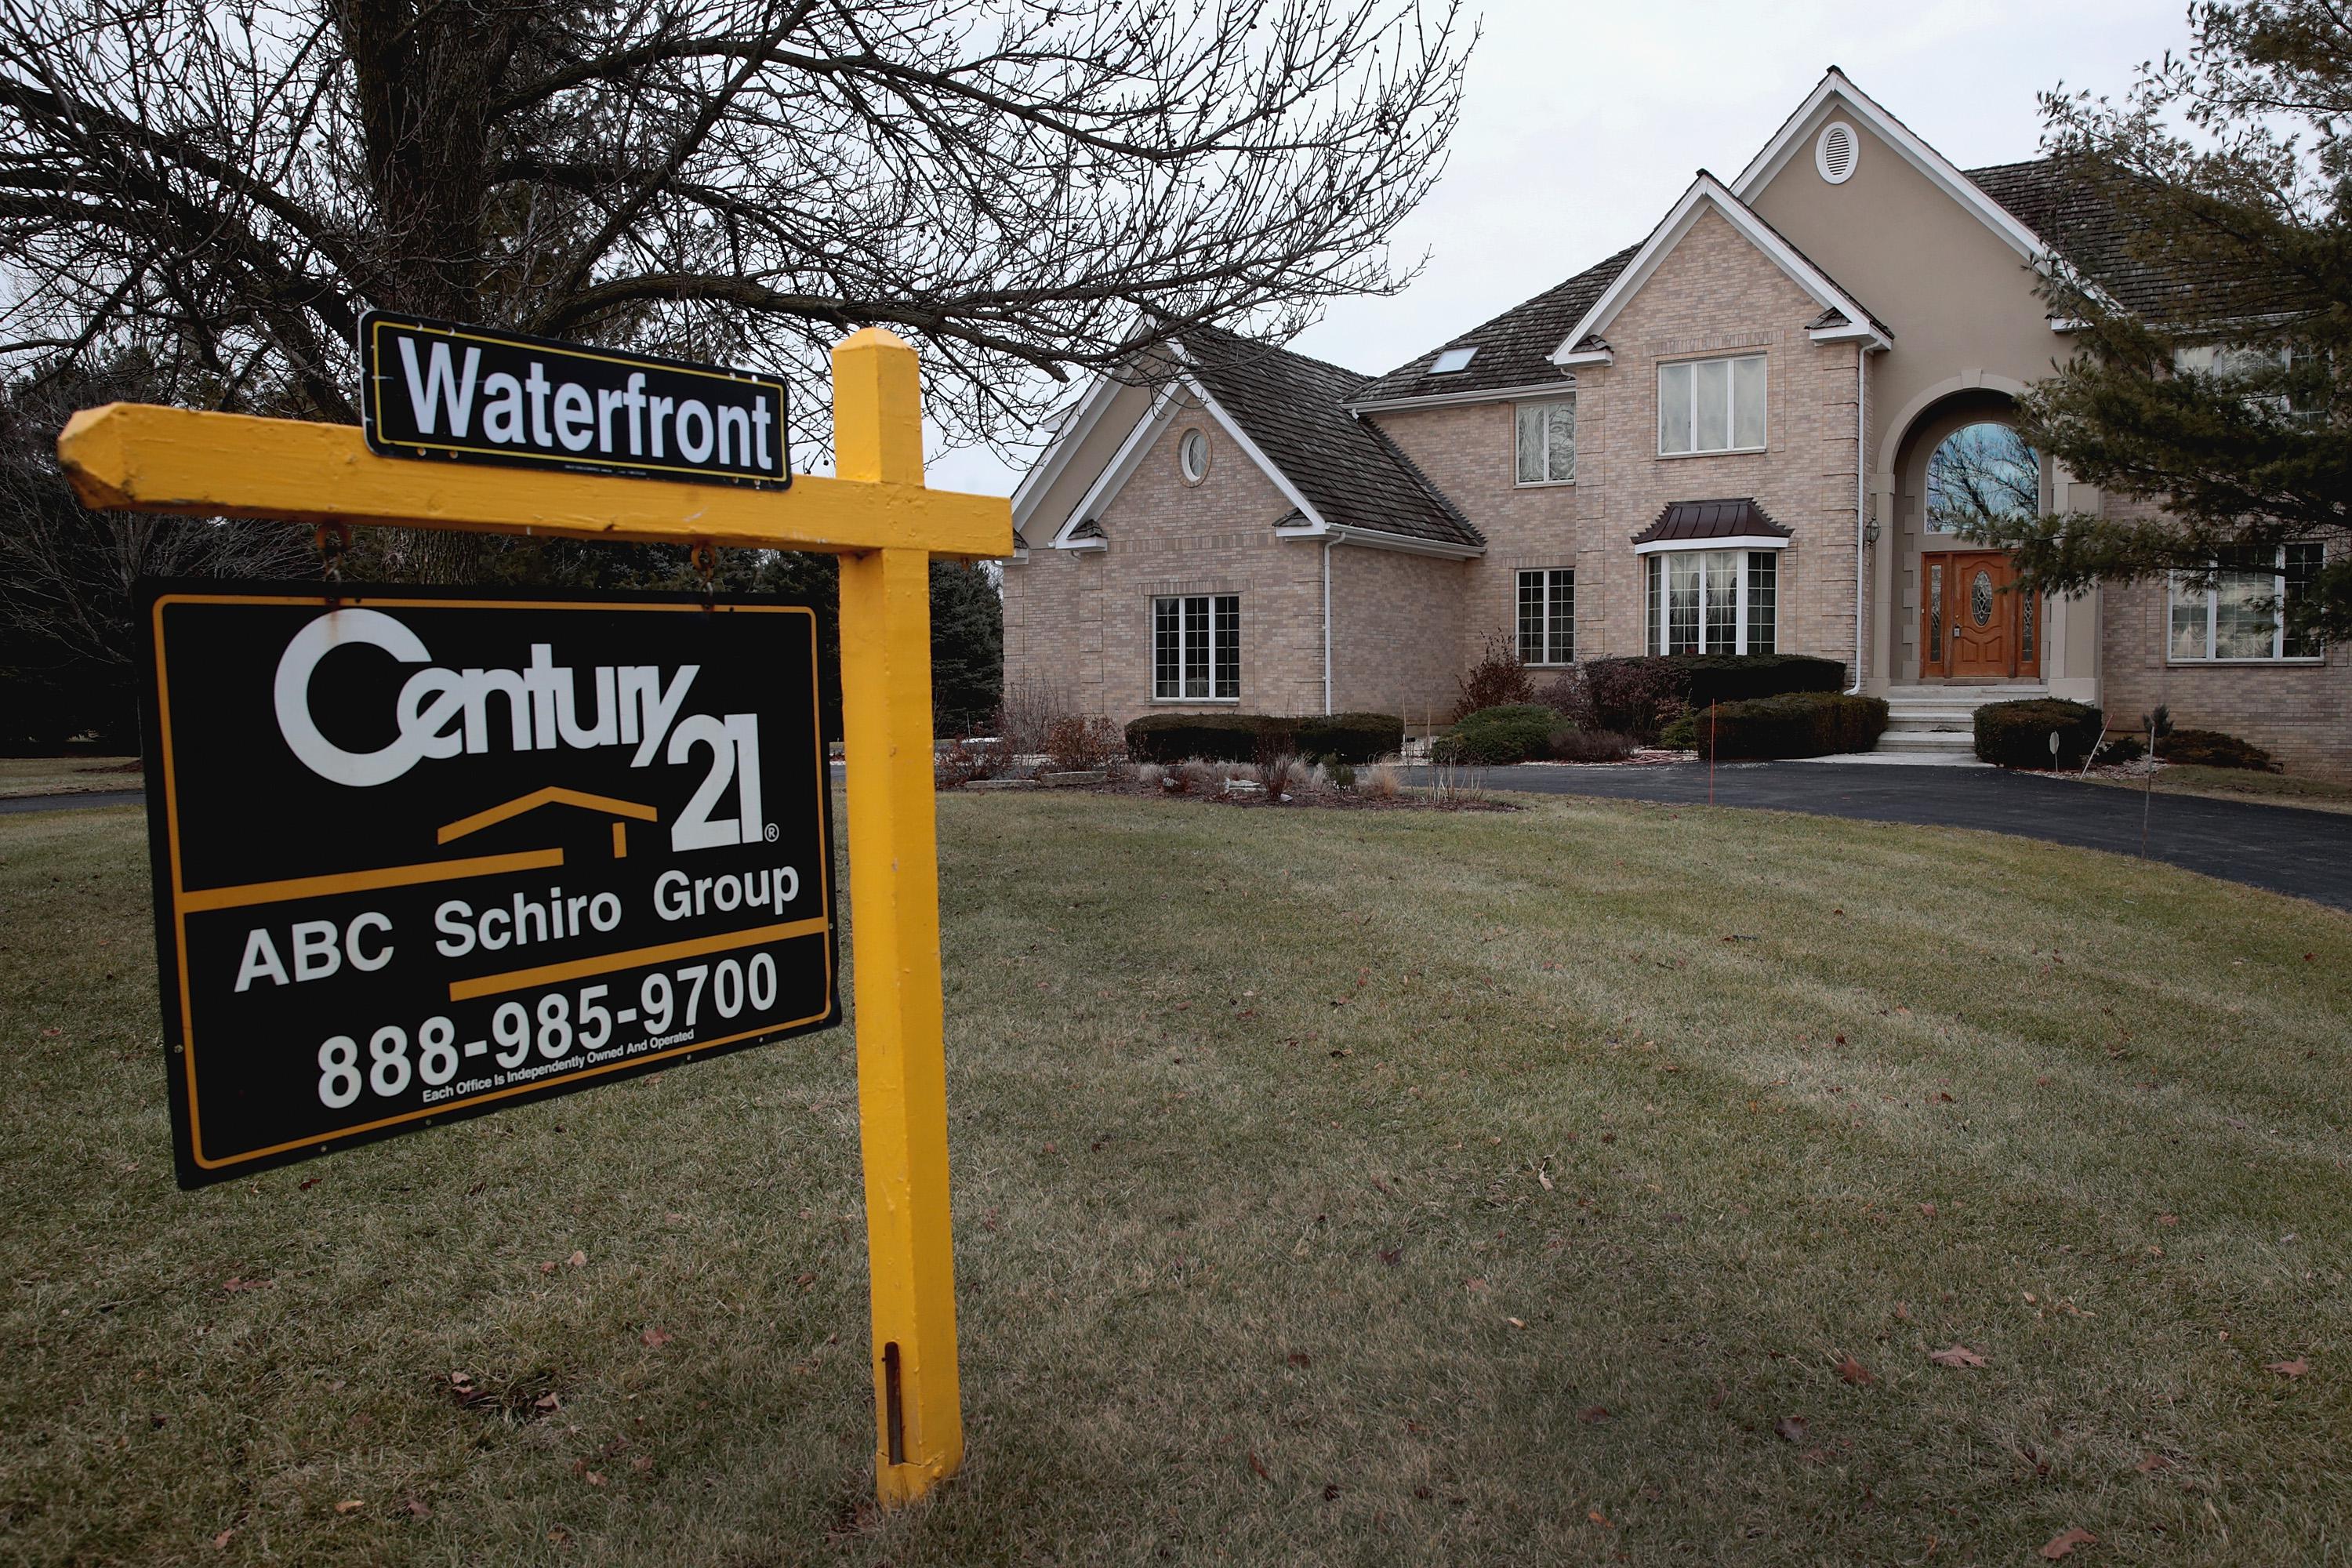 SOUTH BARRINGTON, IL - FEBRUARY 21:  A home is offered for sale on February 21, 2018 in South Barrington, Illinois. January home sales experienced a sharp drop over the same period last year because of a shortage of modestly-priced homes available to first-time home buyers. Sales of homes priced below $100,000 fell 13 percent while sales of homes priced between $500,000 and $750,000 increased nearly 12 percent in January.  (Photo by Scott Olson/Getty Images)